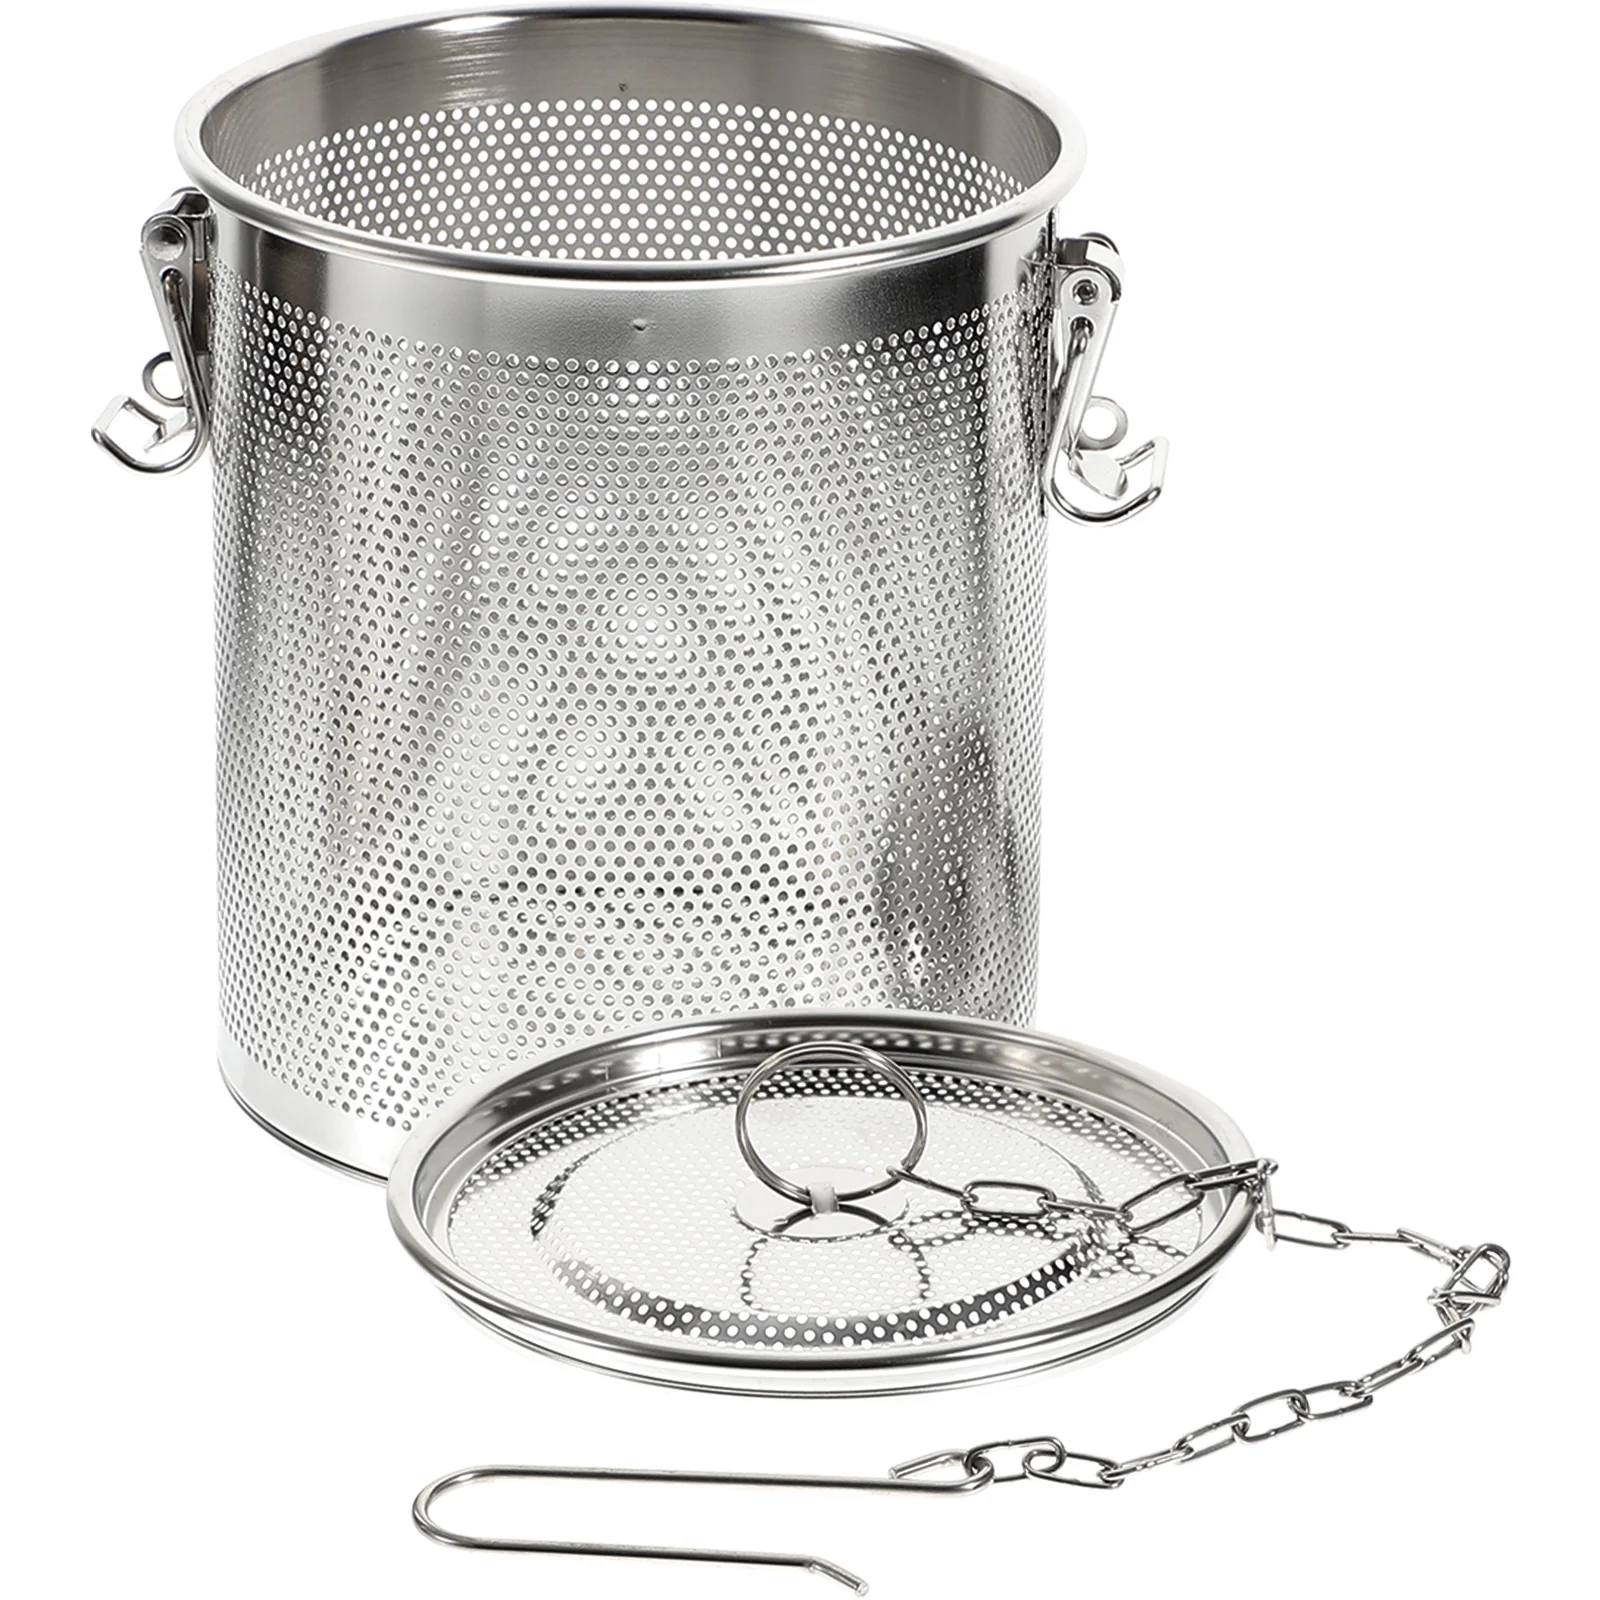 

Filter Stainless Steel Wire Mesh Design Brine Strainer Basket Soup Seasonings Separation Filter Cooking Teapots for infusions